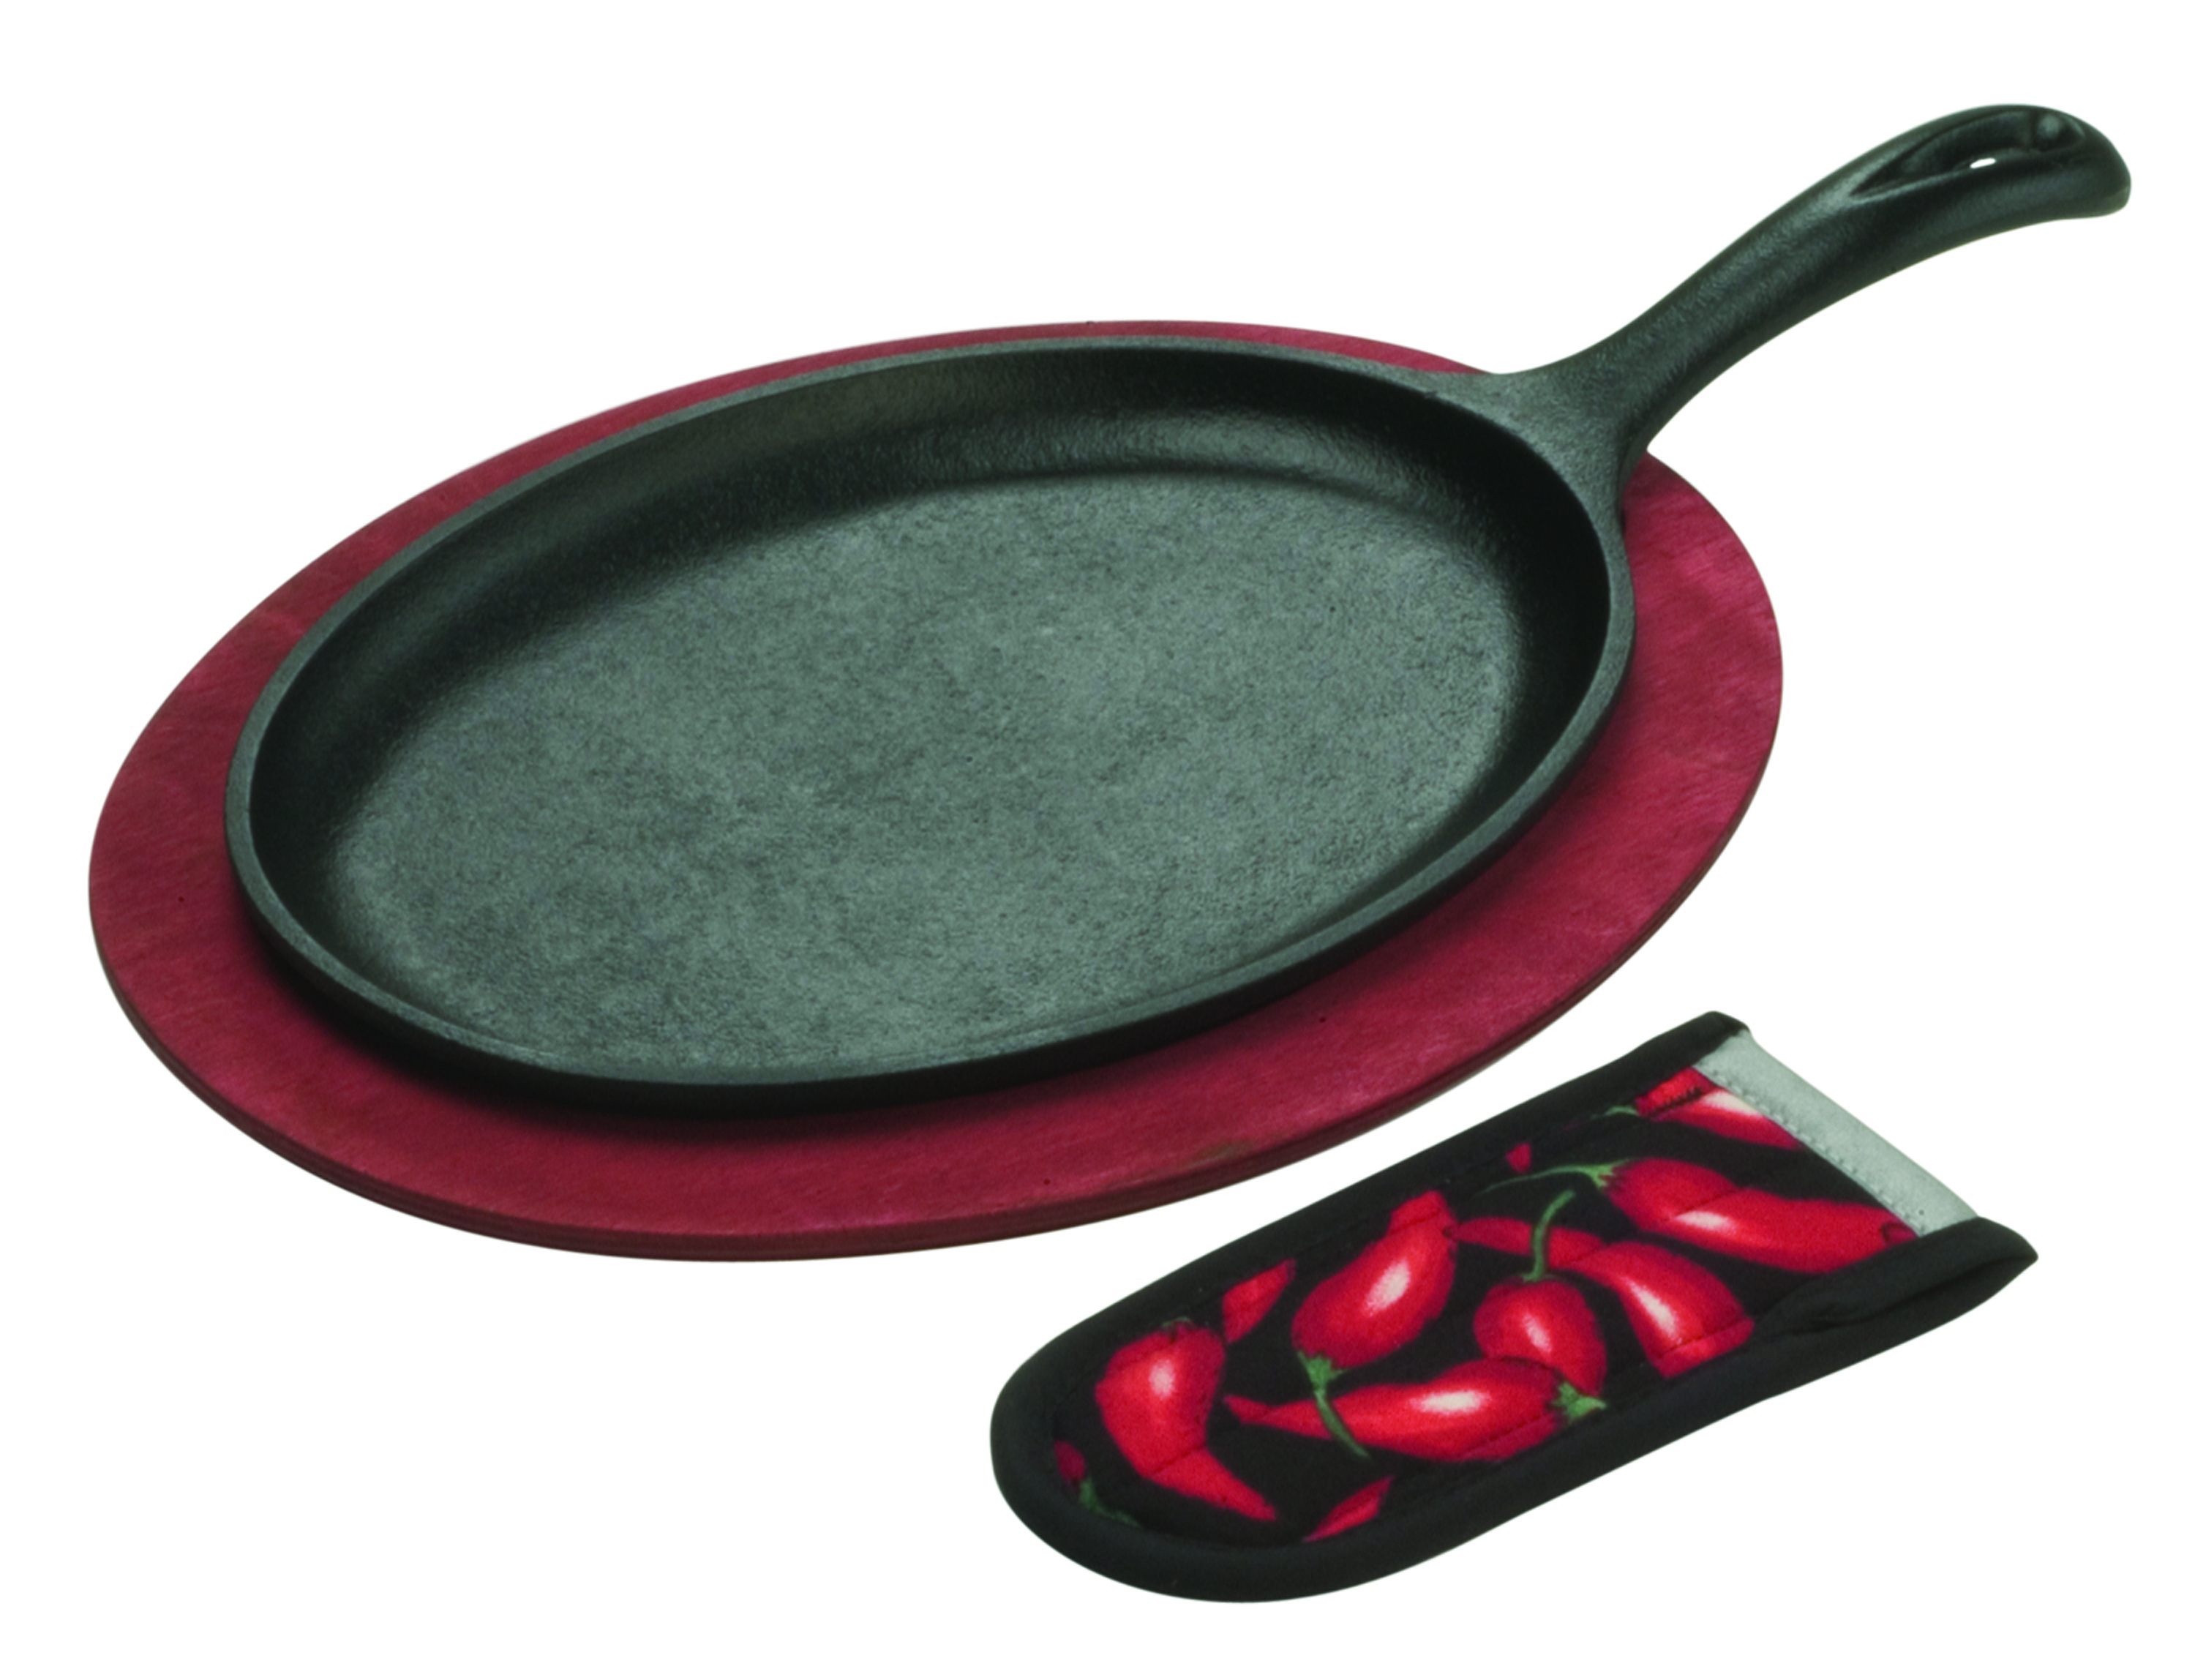 Lodge Cast Iron Fajita Set with Red Stained Wooden Underliner & Handle Mitt, 3 Piece - image 1 of 7